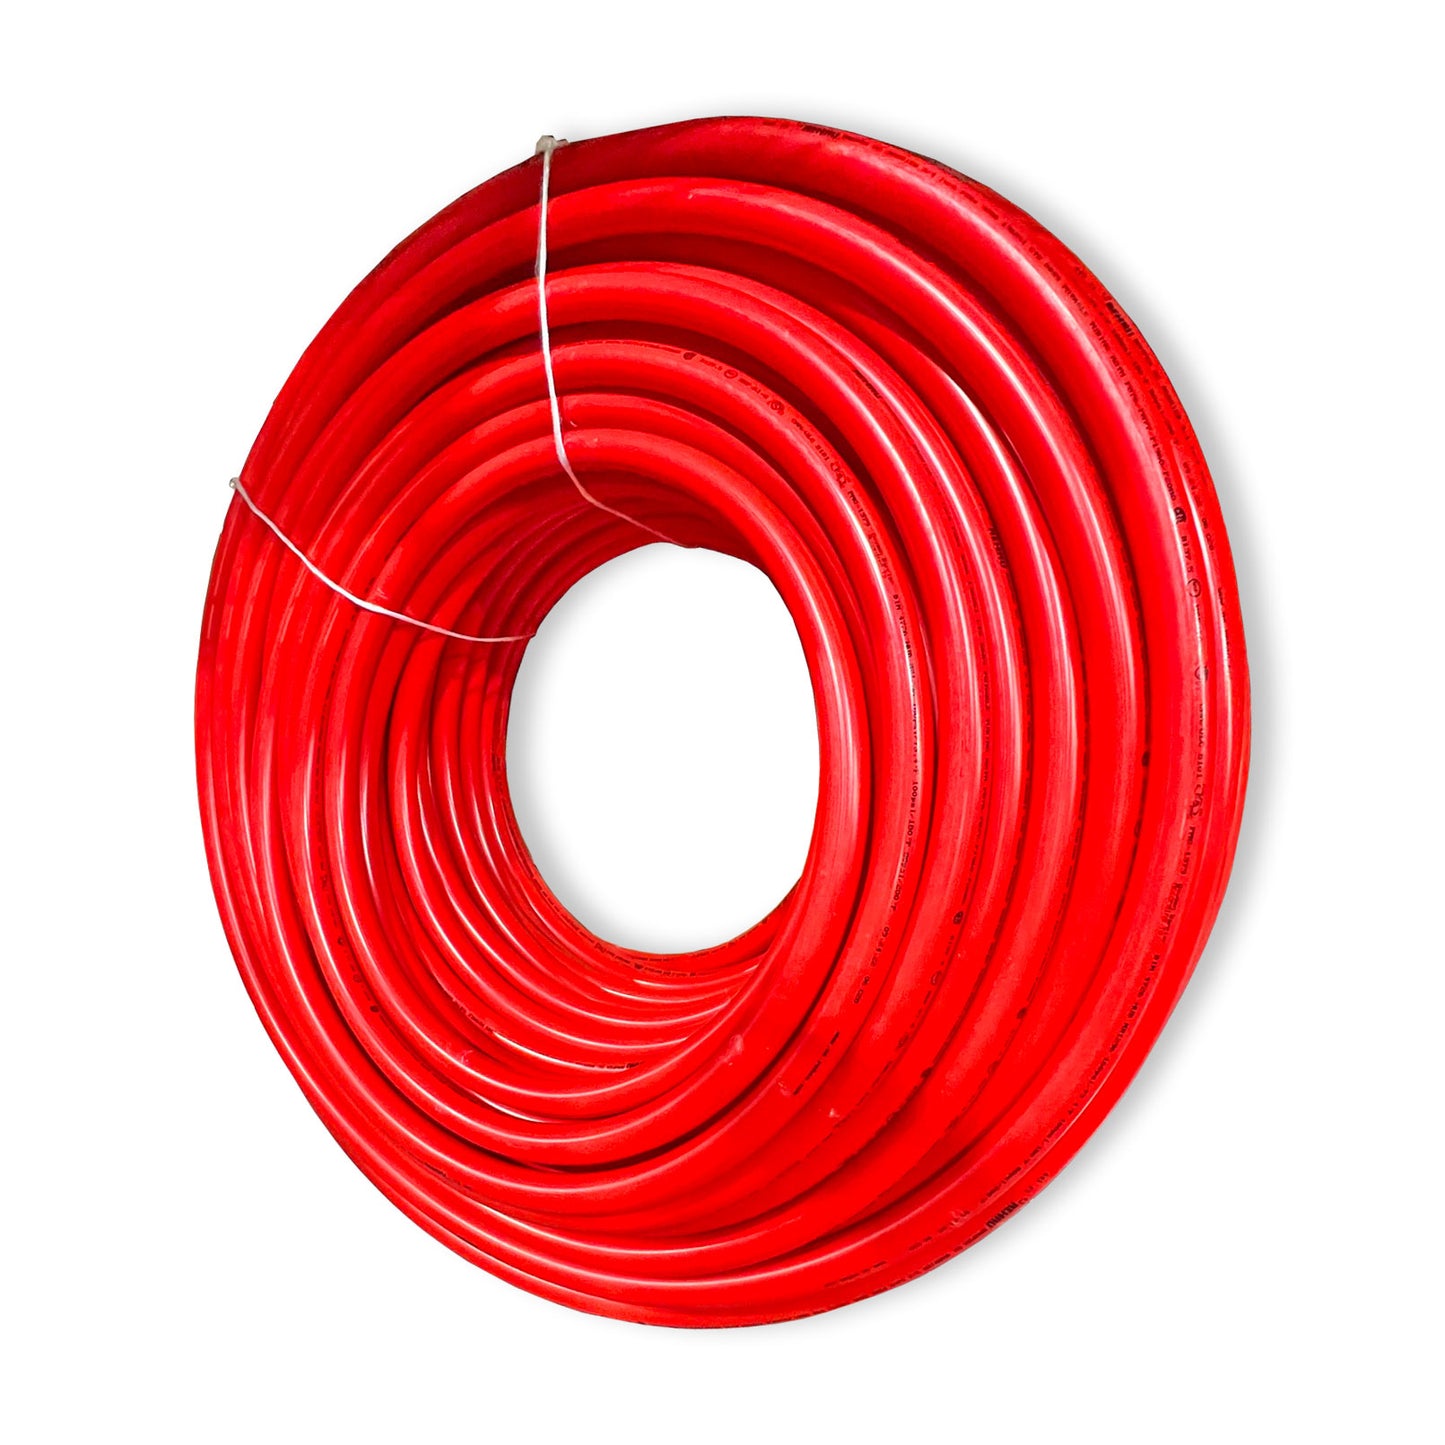 136051-000 - 3/4" RAUPEX O2  Barrier Pipe, 1000 ft coil (304.8 m)